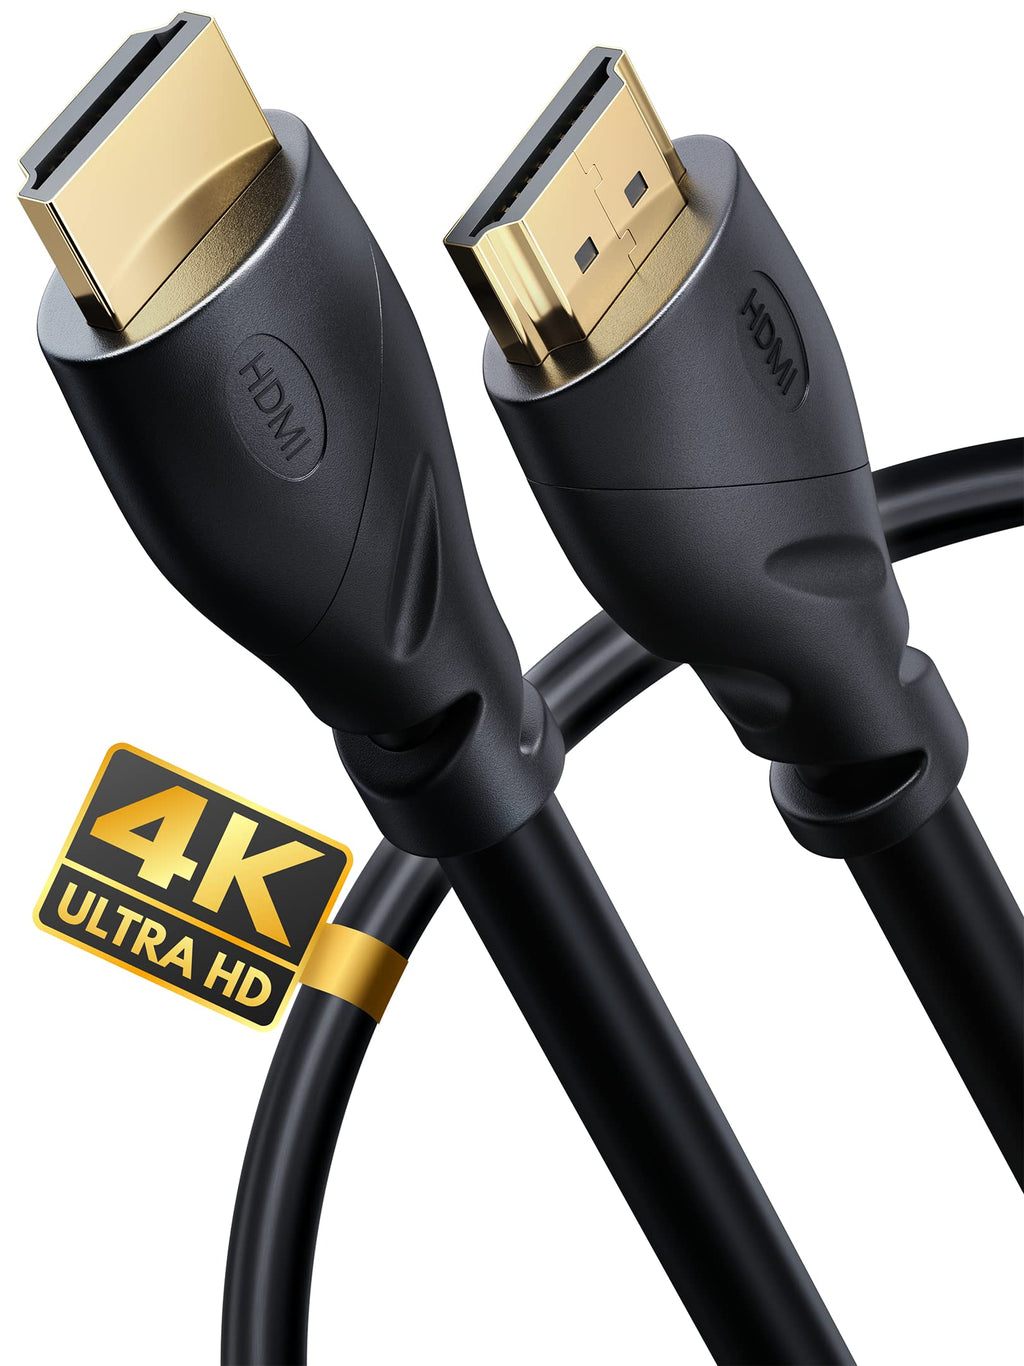 PowerBear 4K HDMI Cable 3 ft | High Speed, Rubber & Gold Connectors, 4K @ 60Hz, Ultra HD, 2K, 1080P & ARC Compatible for Laptop, Monitor, PS5, PS4, Xbox One, Fire TV, Apple TV & More 1 3 Feet